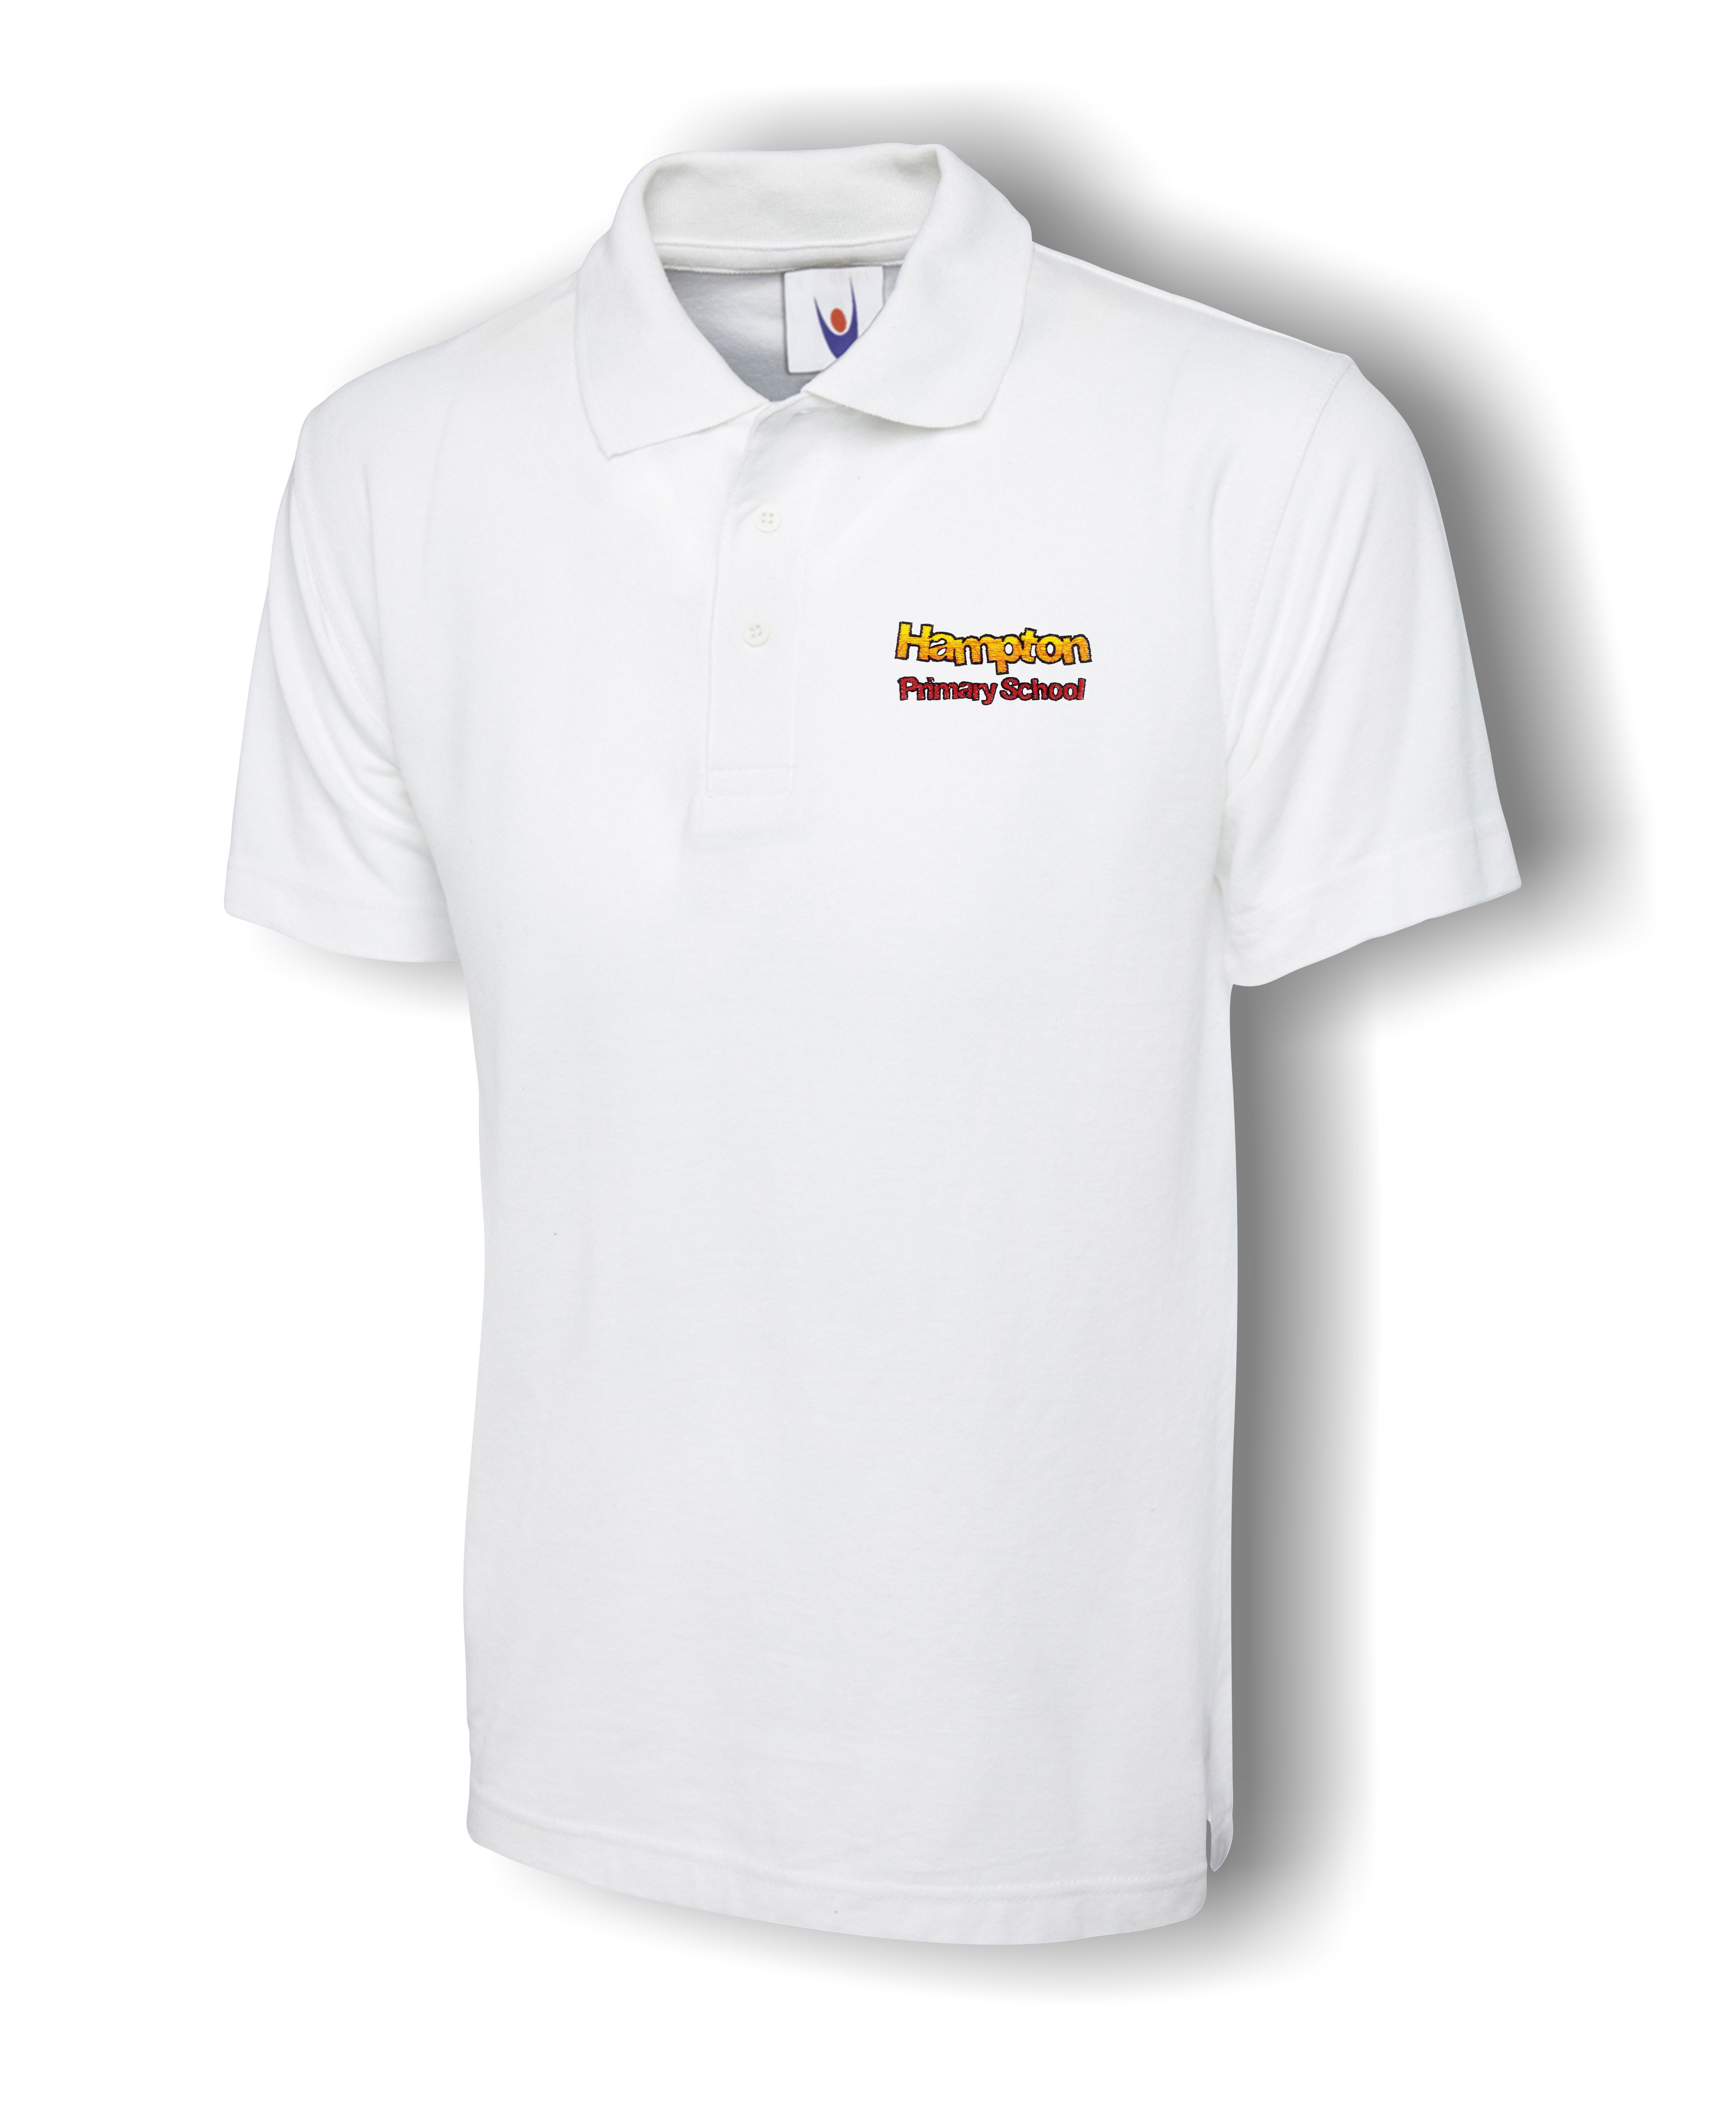 HPS STAFF POLO - Ambition Sport